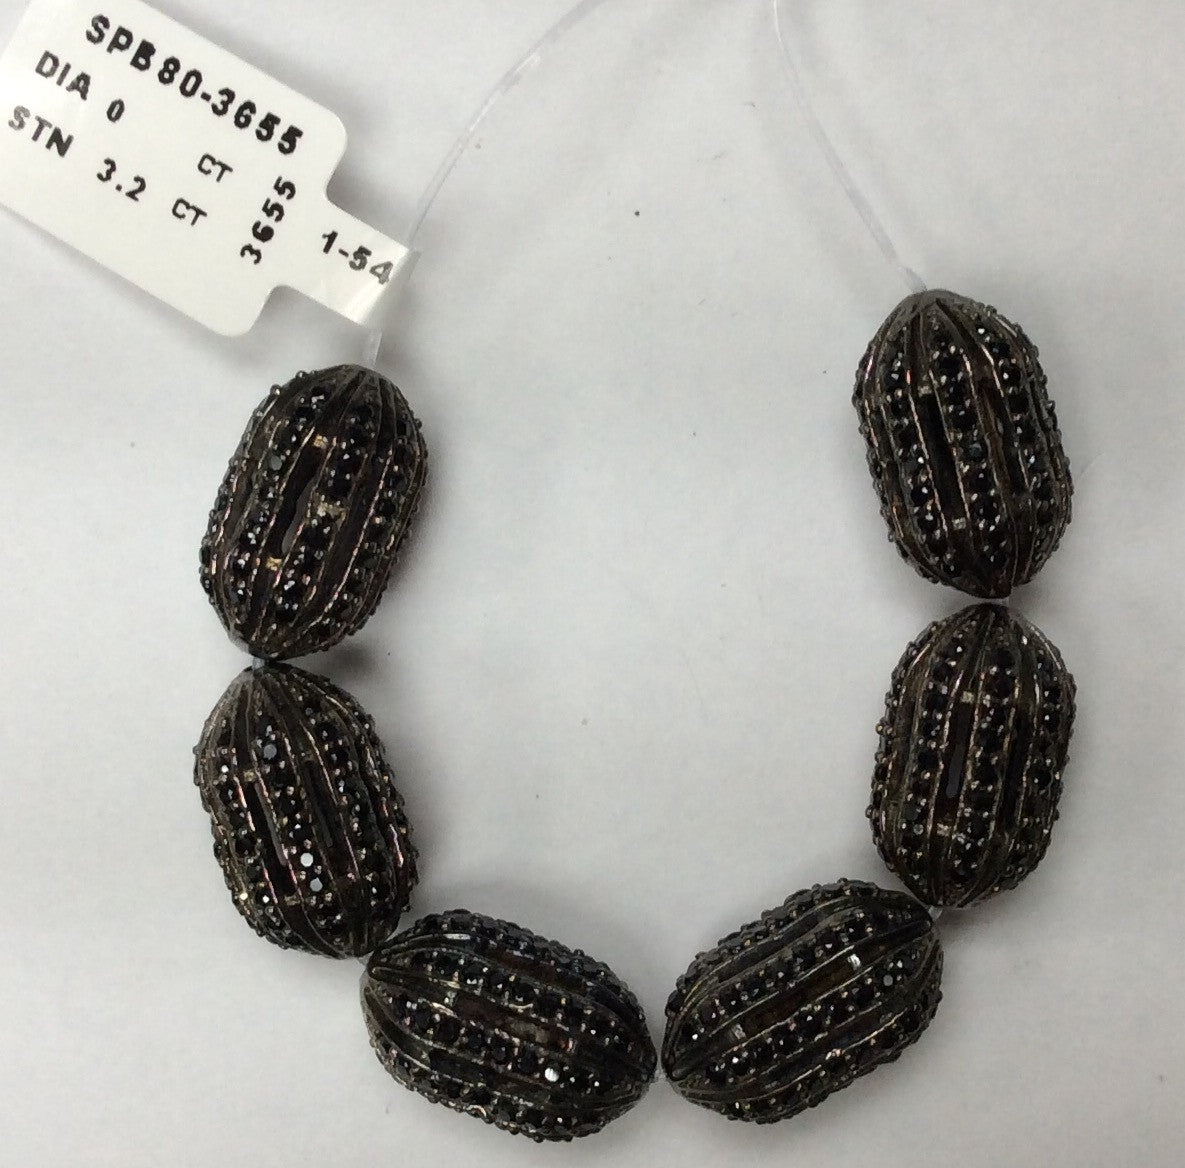 Oval Shaped Black Spinel Bead